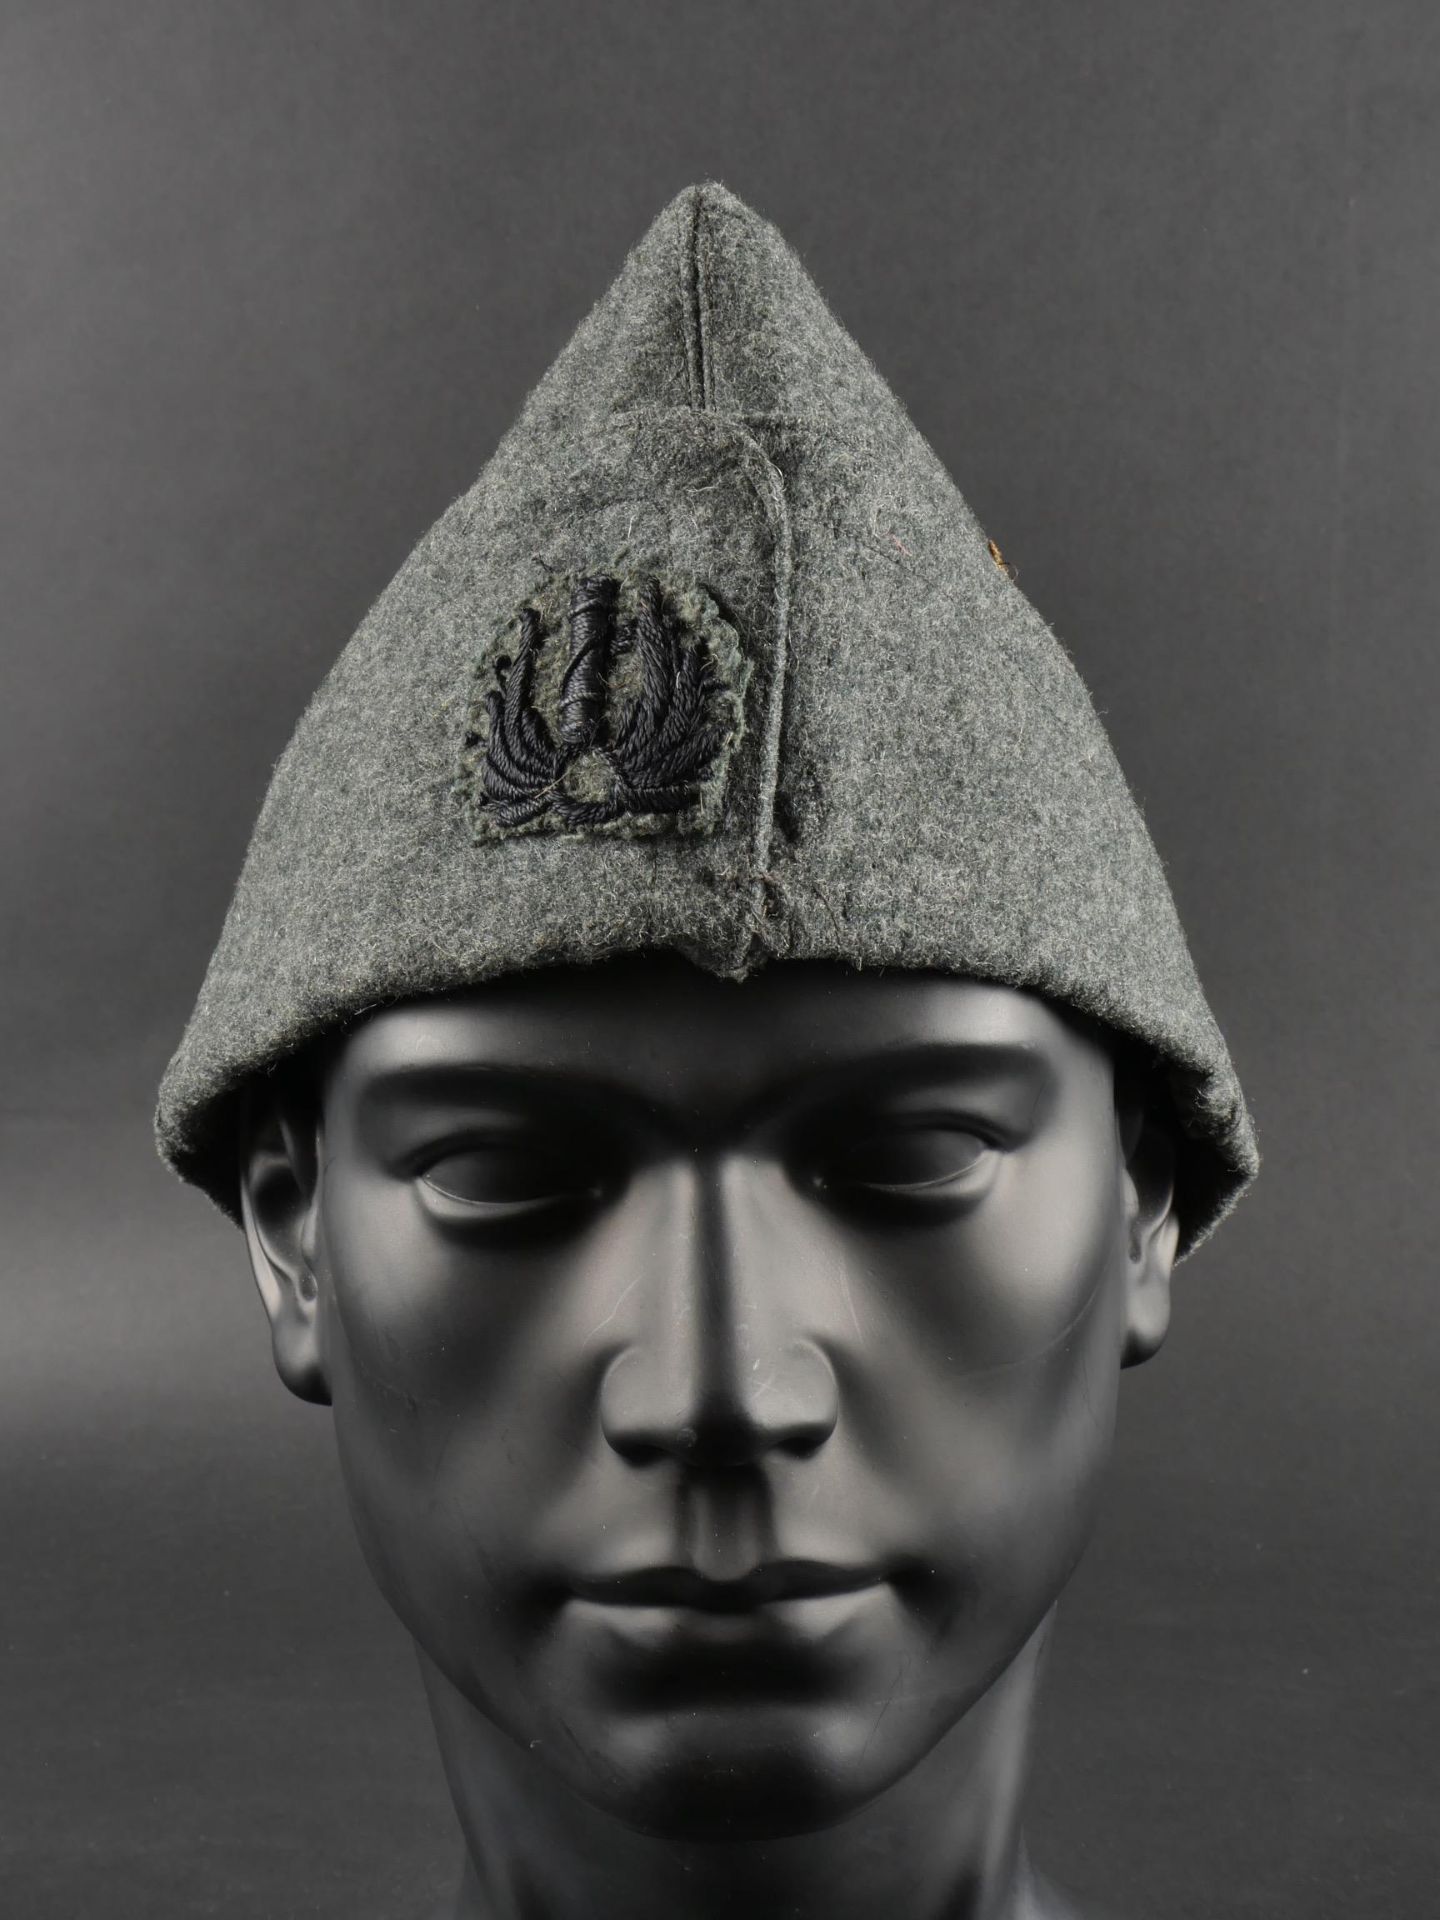 Deux calots troupe de larmee Royale italienne. Two Royal Italian Army troop caps. - Image 11 of 19